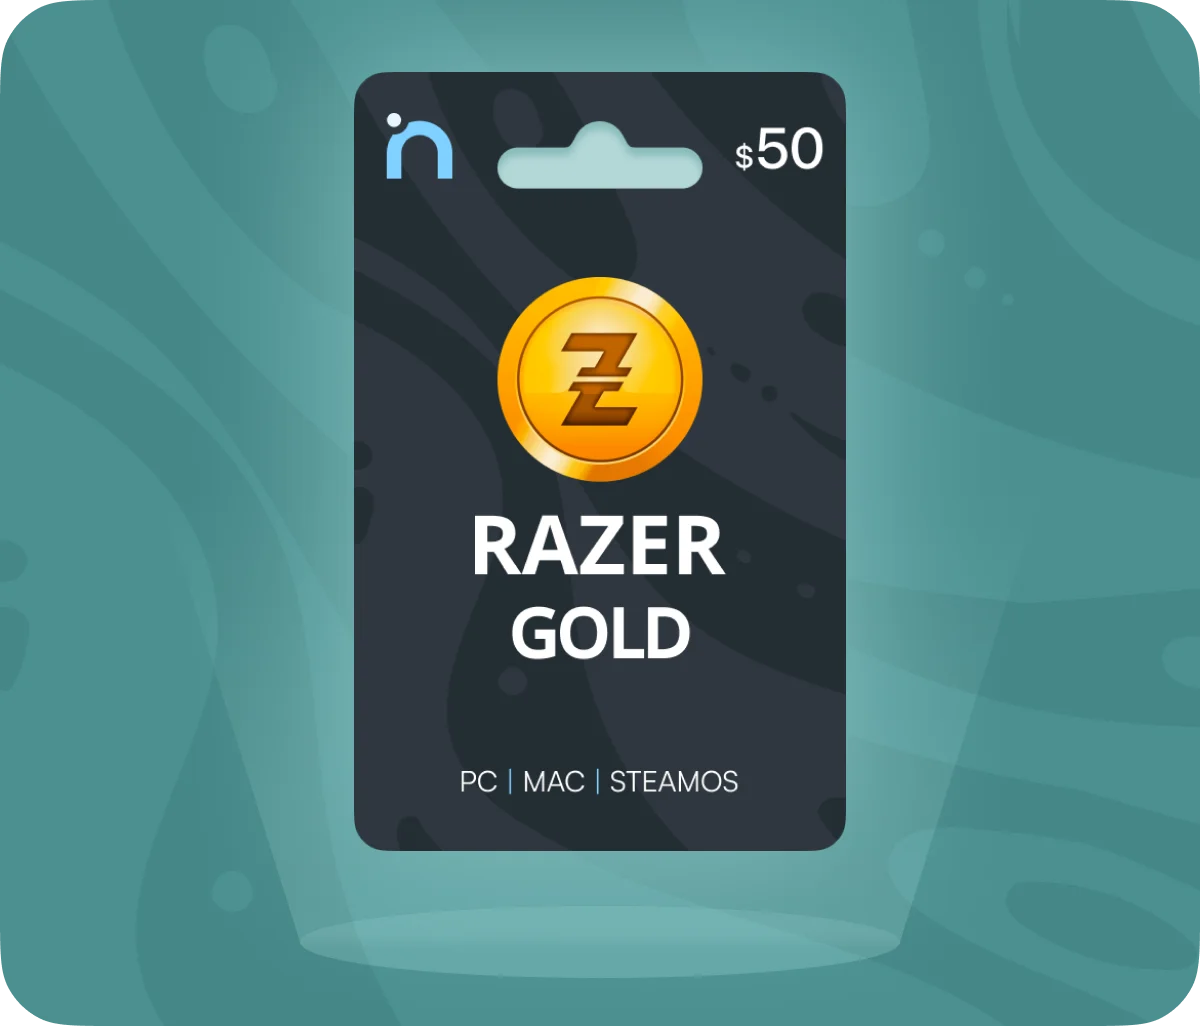 Razer Gold Gift Card; Pin Your Golden Opportunity - EZ PIN - Gift Card  Articles, News, Deals, Bulk Gift Cards and More